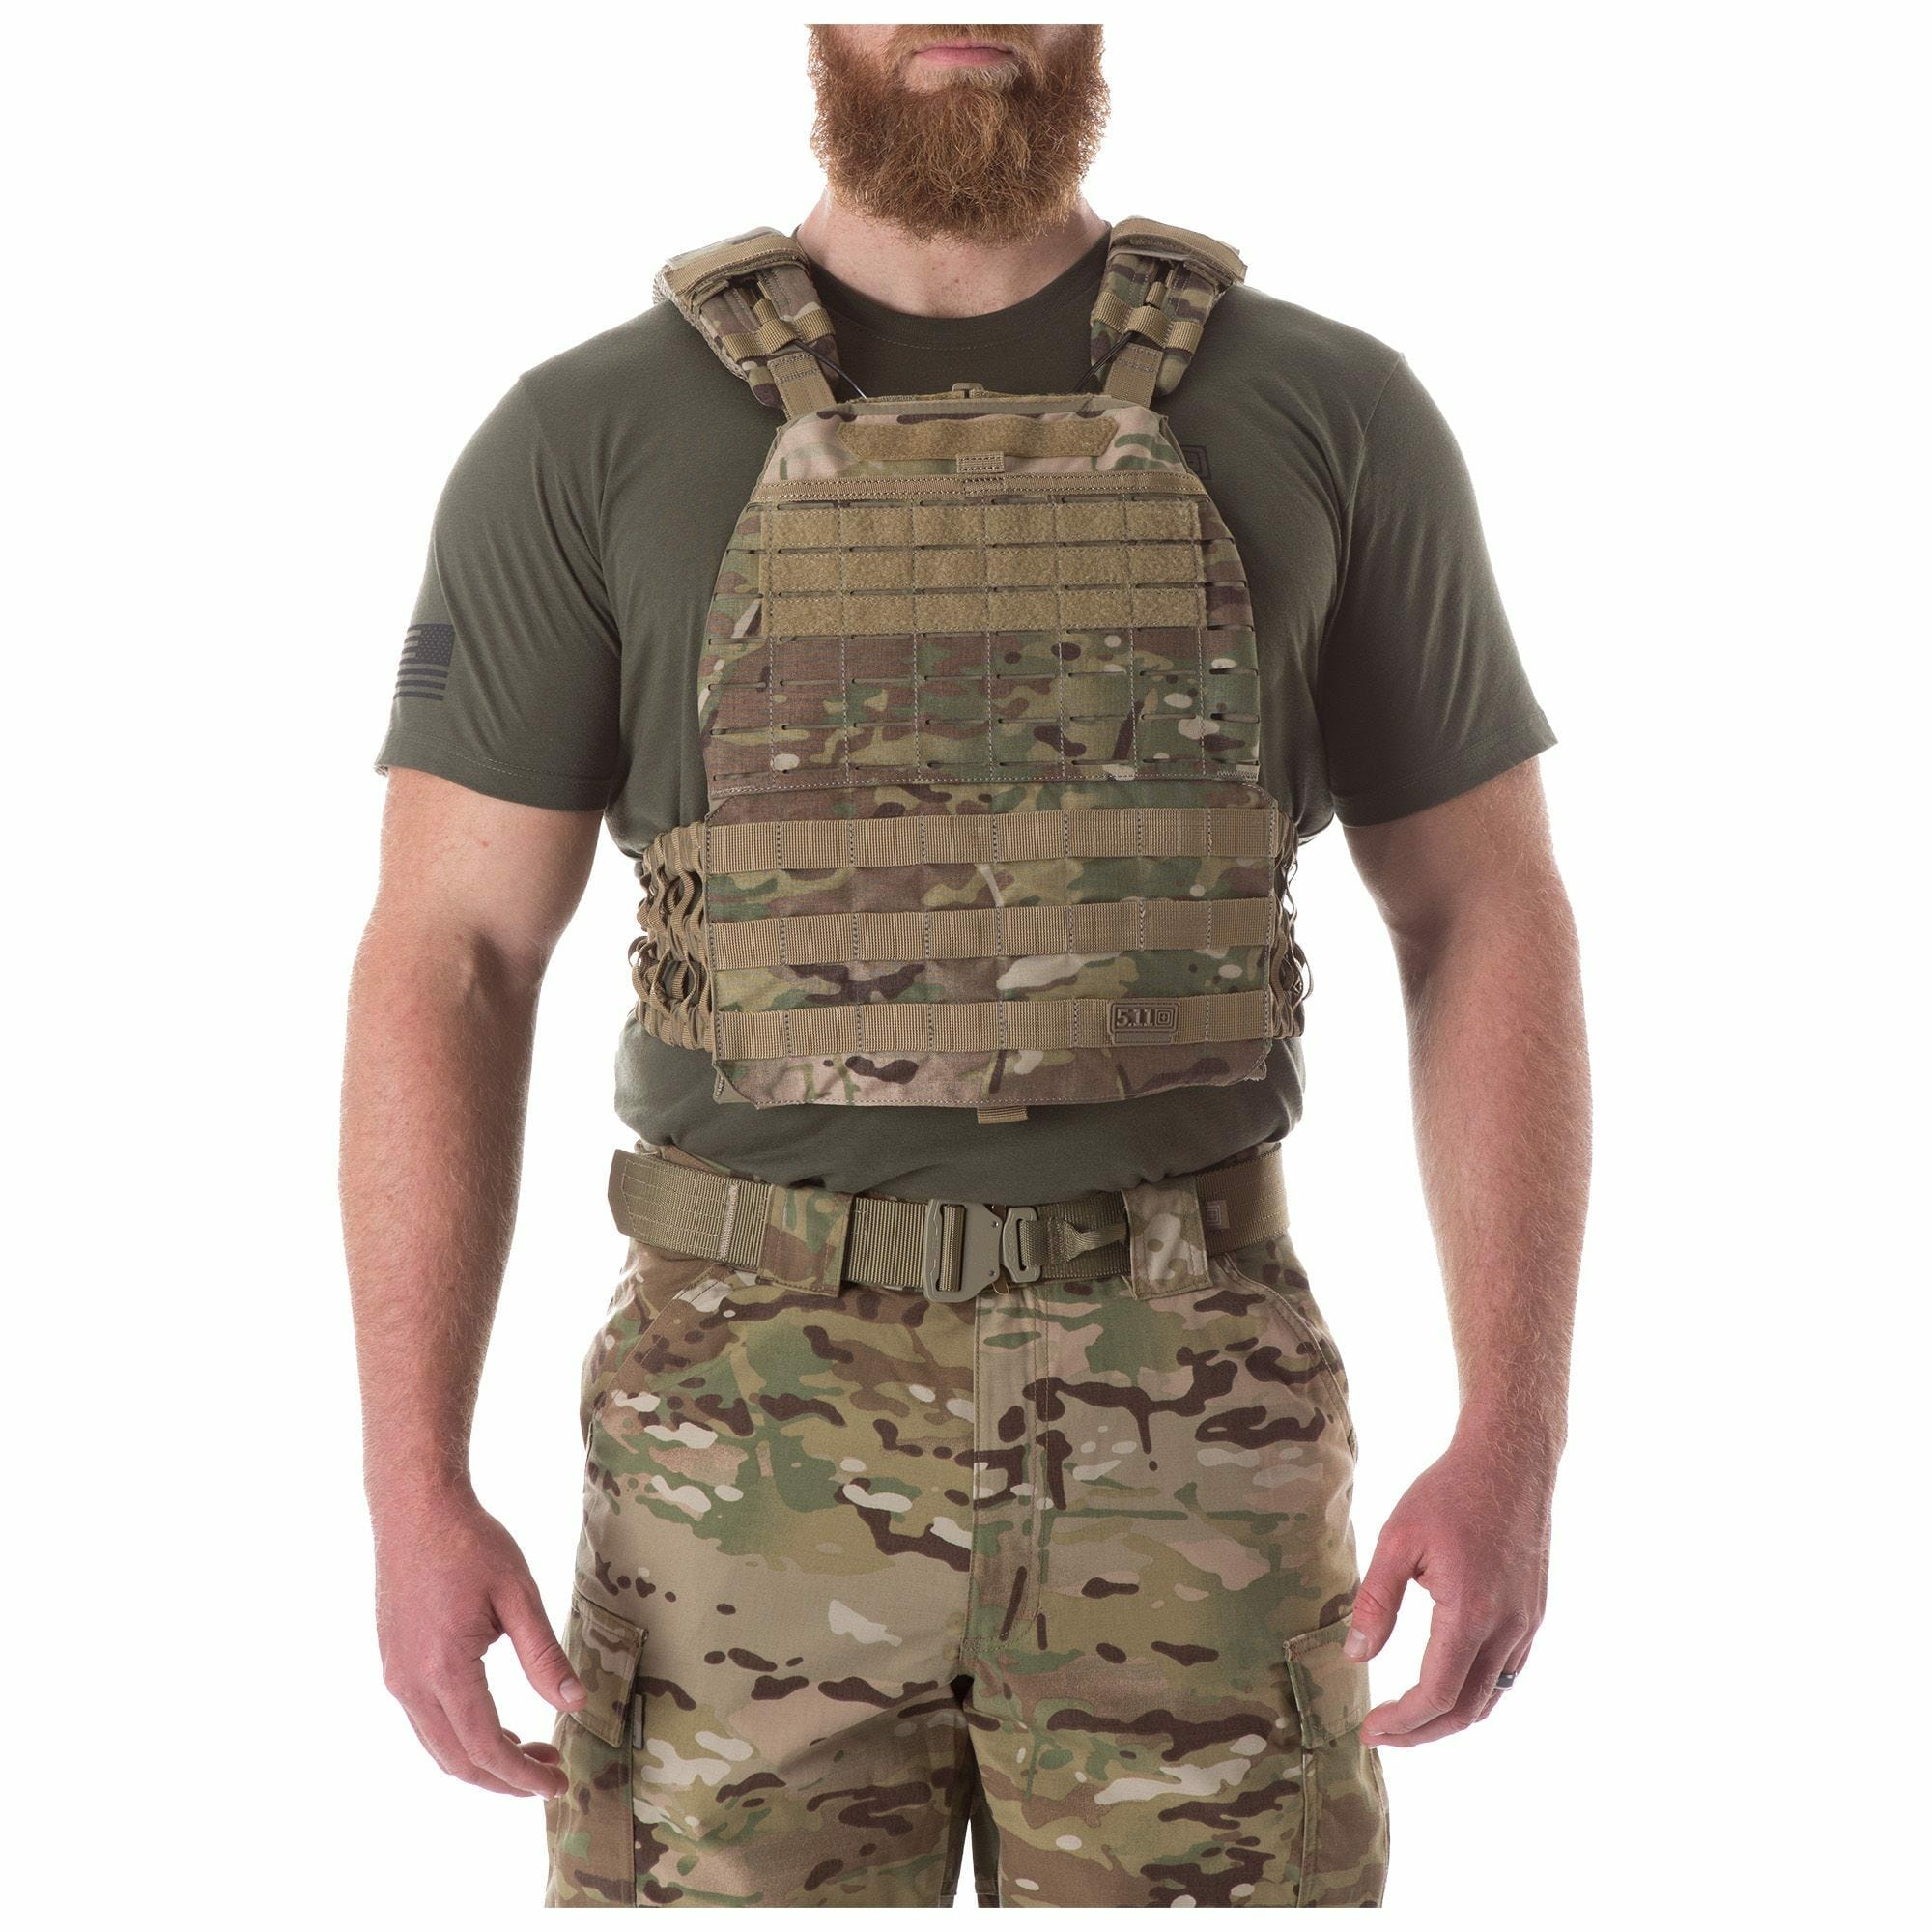 TacTec Trainer Weight Vest, High Performance Fitness Gear